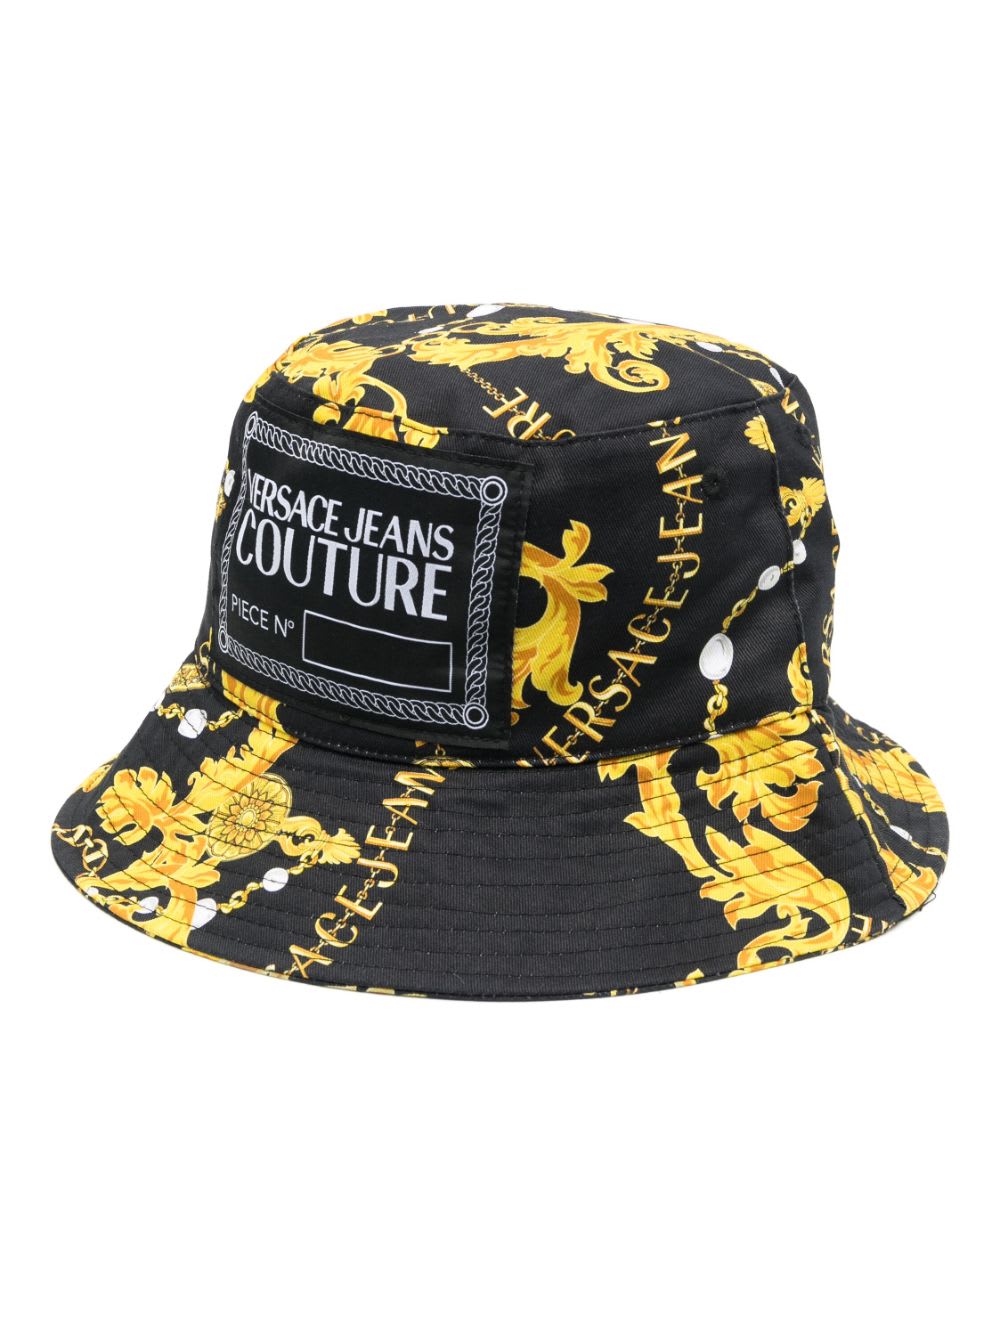 VERSACE JEANS COUTURE PRINTED CHAIN BUCKET HAT